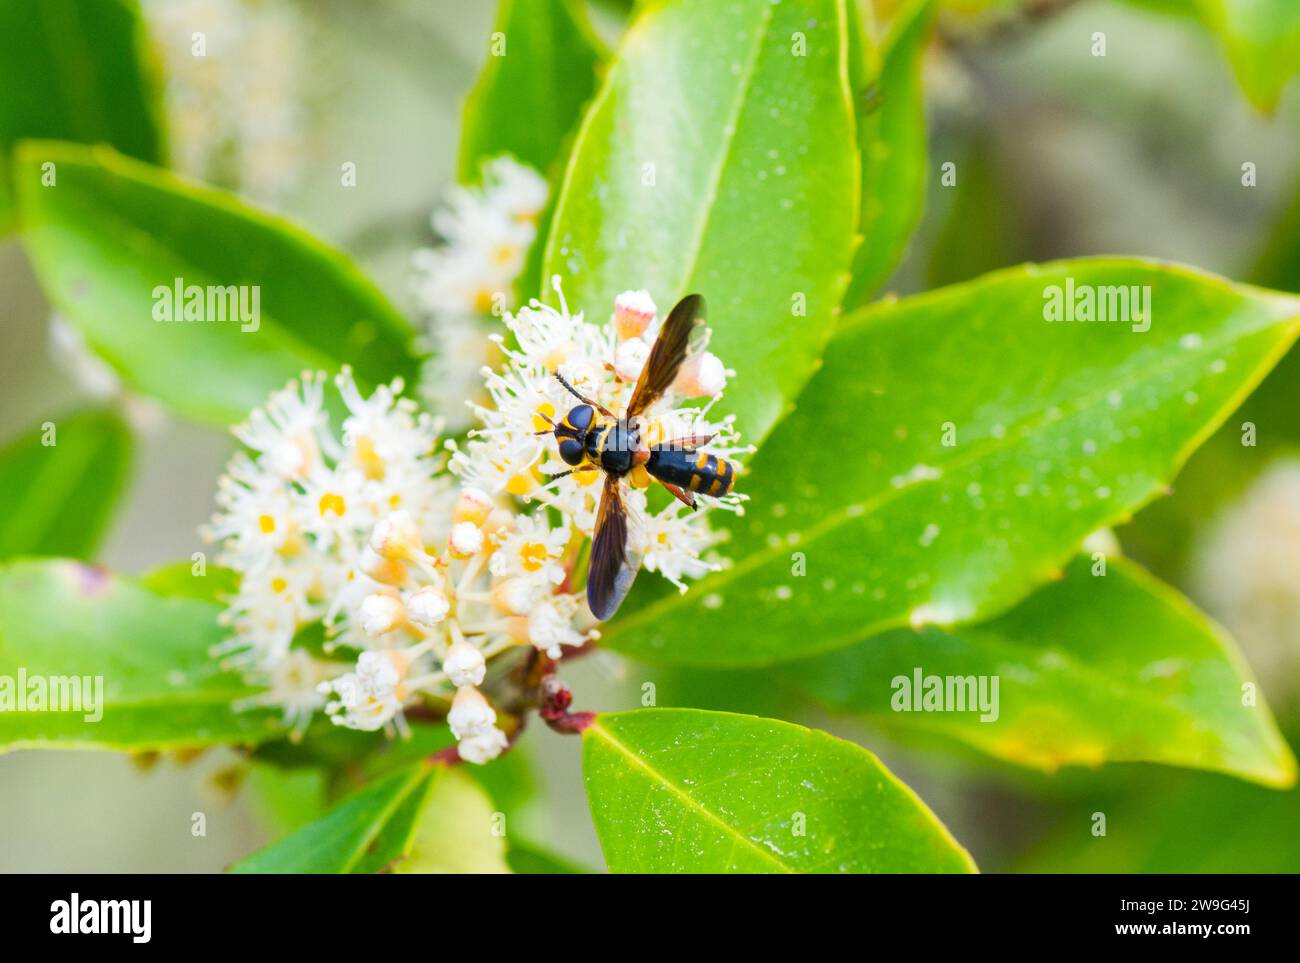 Trichopoda plumipes - a species of bristle fly in the family Tachinidae. Top dorsal view Eating nectar from cherry laurel tree blooms - Stock Photo